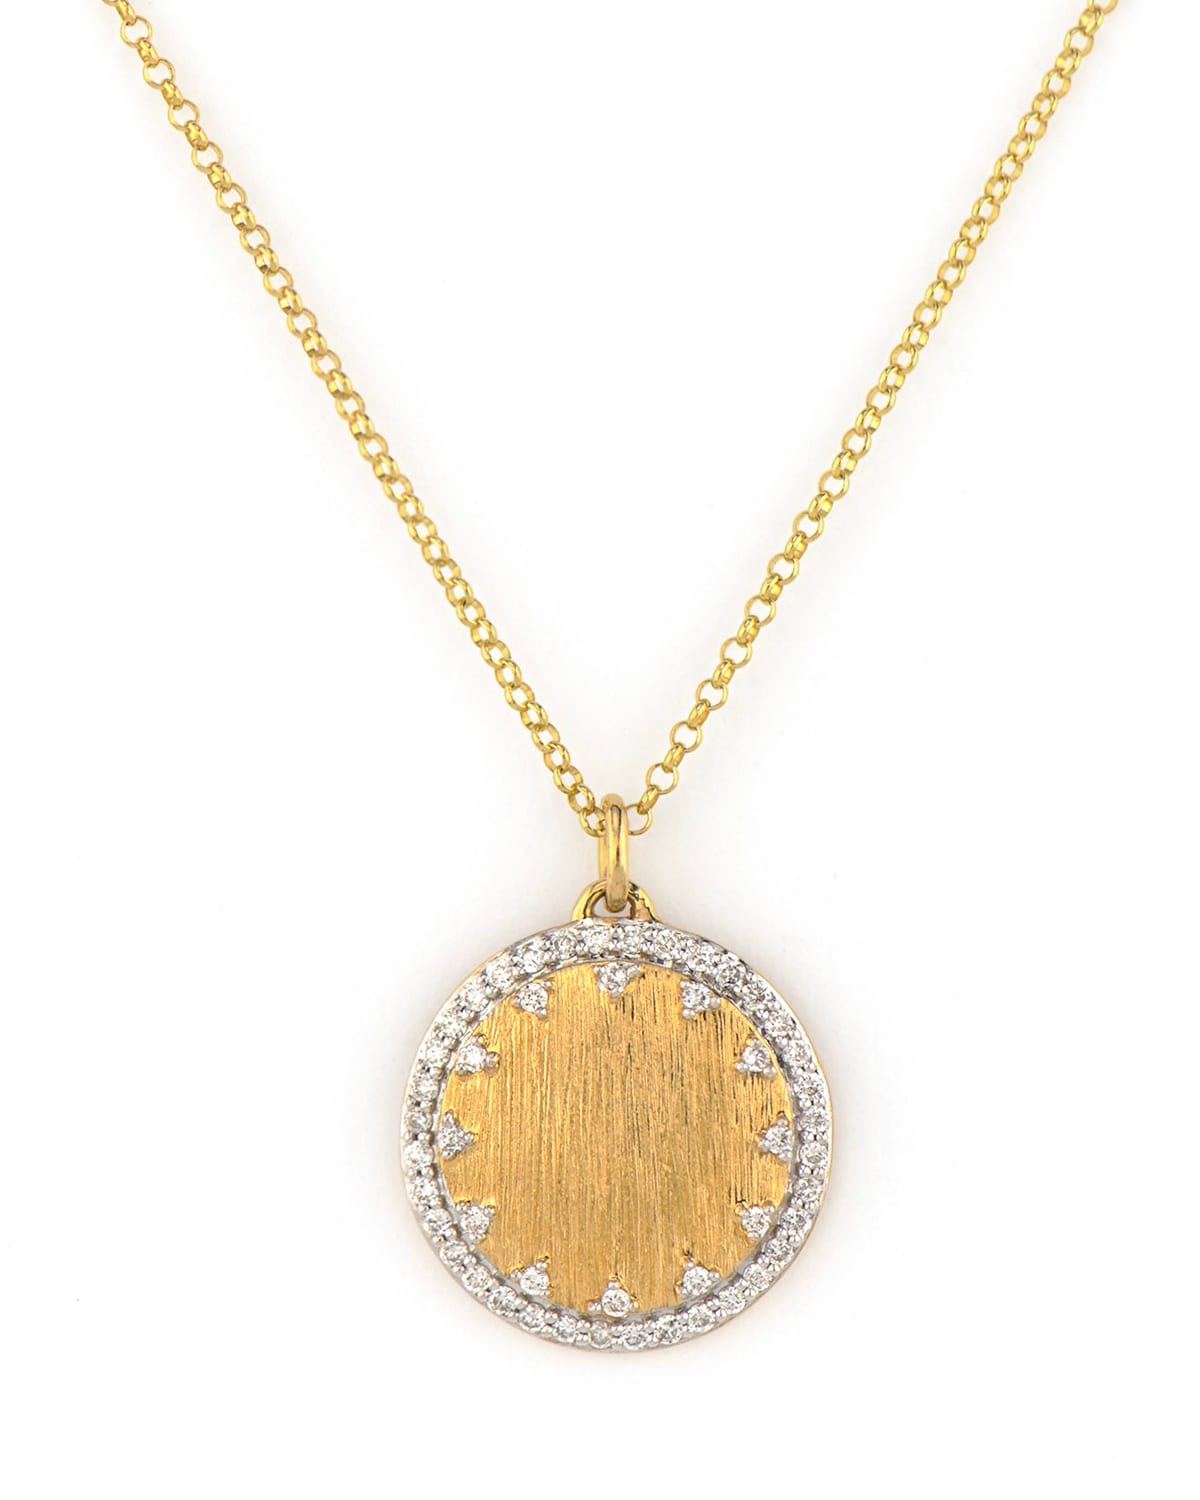 Jude Frances Provence Small Pave Disc Necklace